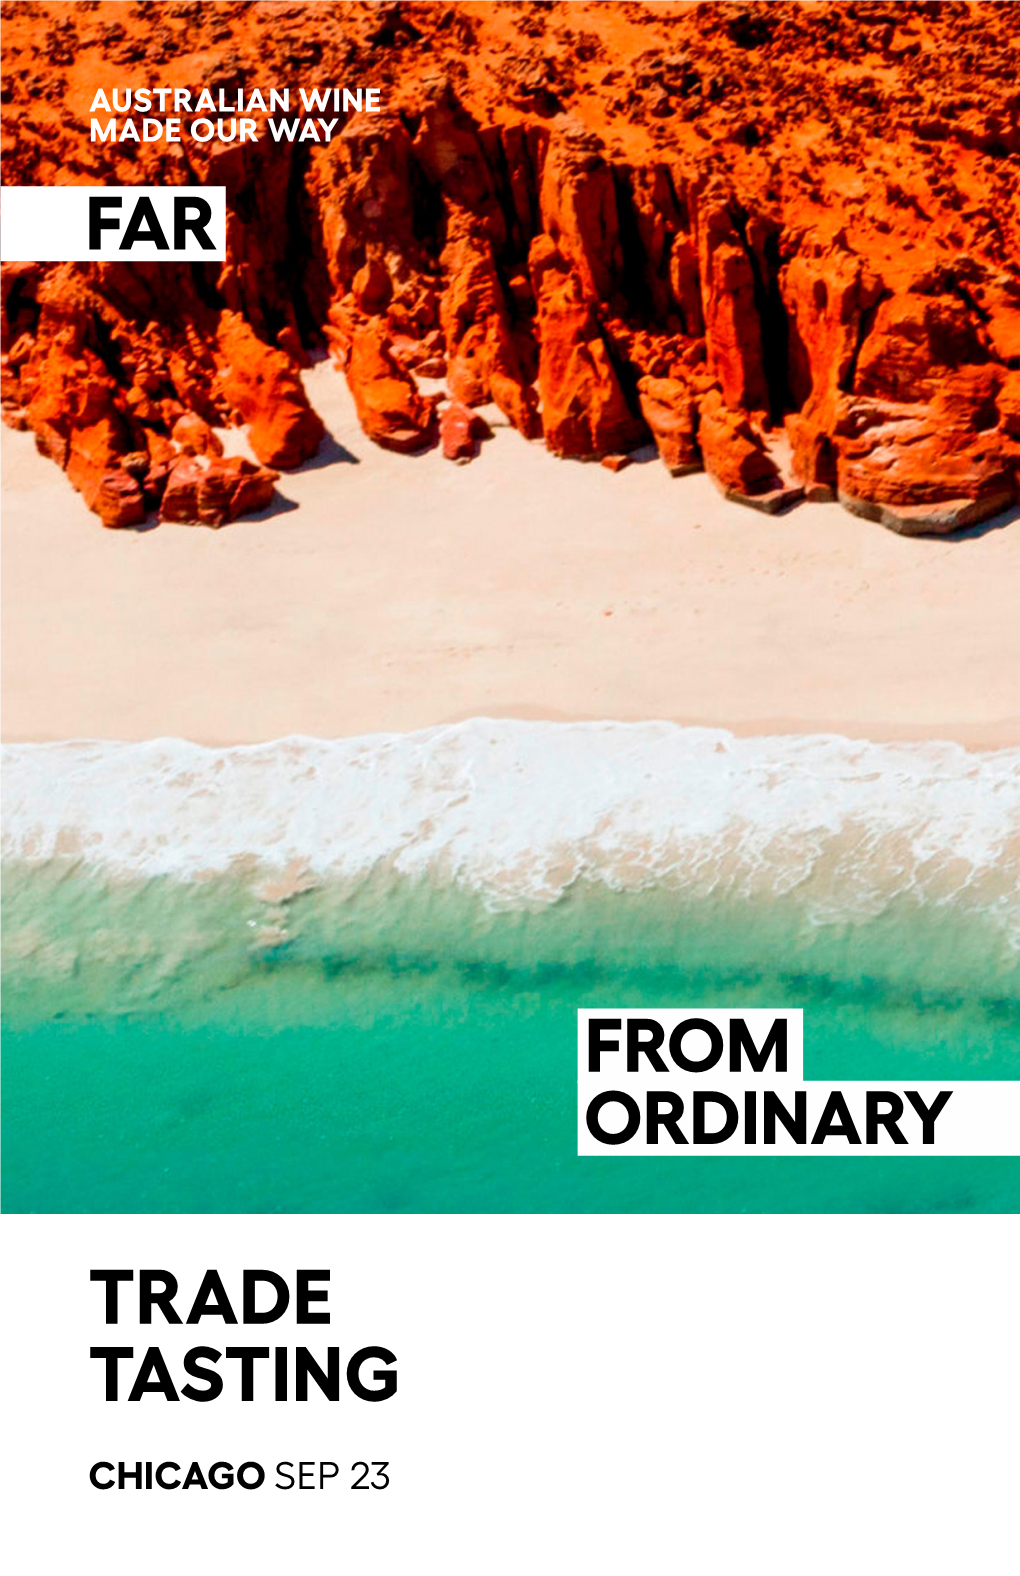 Download the Official Tasting Booklet for the Far from Ordinary